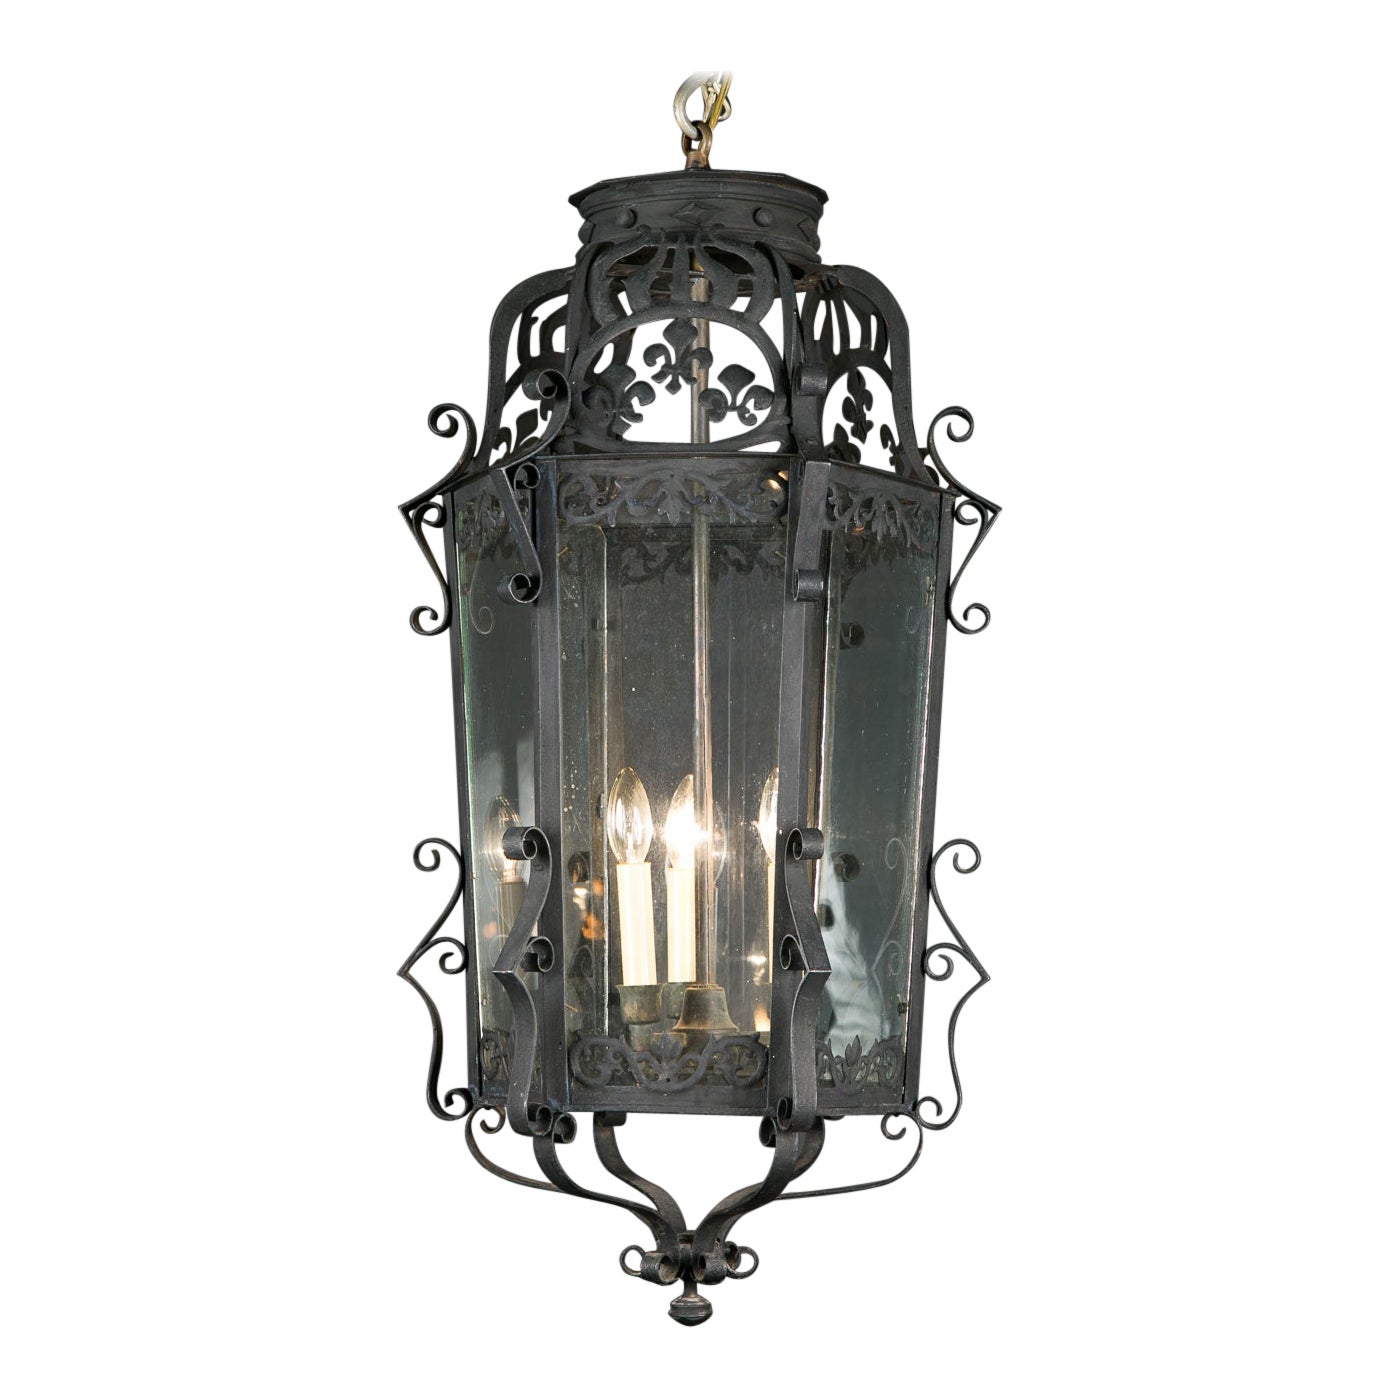 French 19th Century Iron Hanging Lantern with Groups of Fleur De Lis at Top